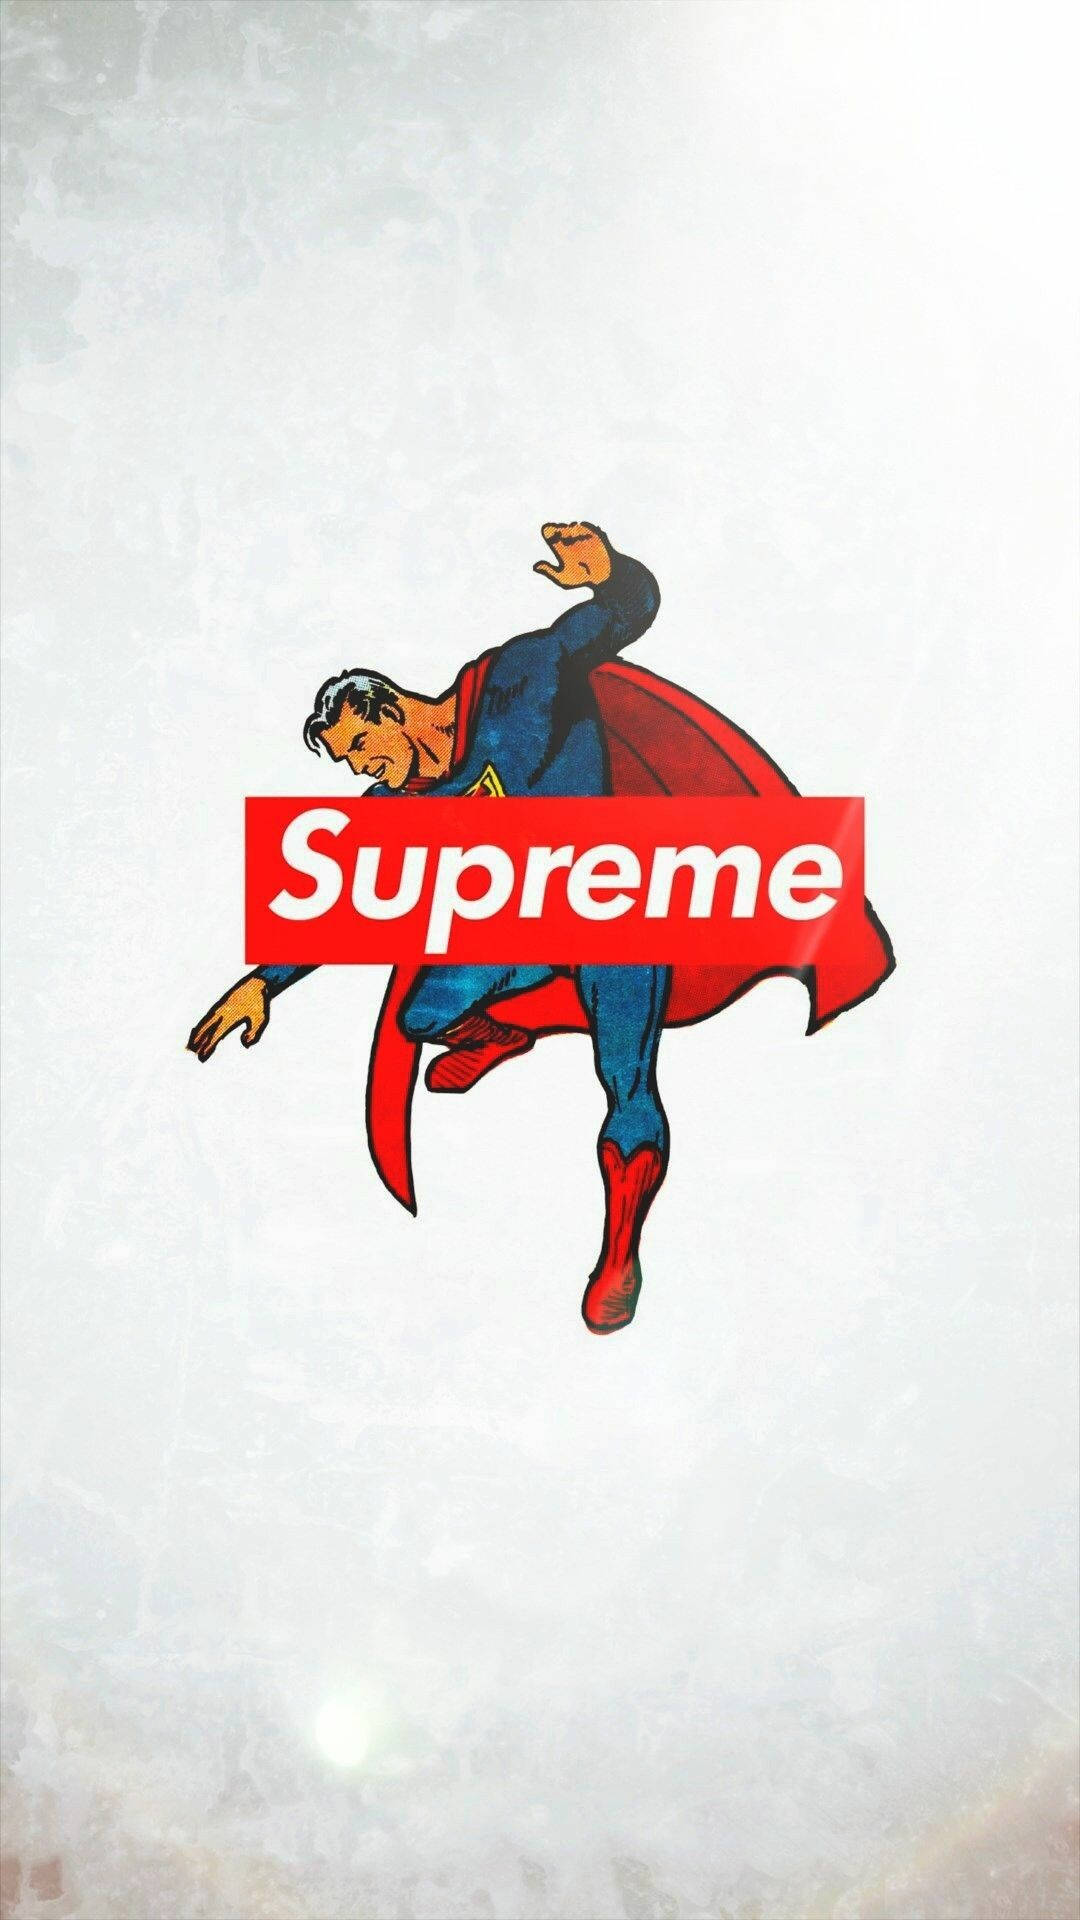 Superman In Supreme Style: Embodying The Hype Culture